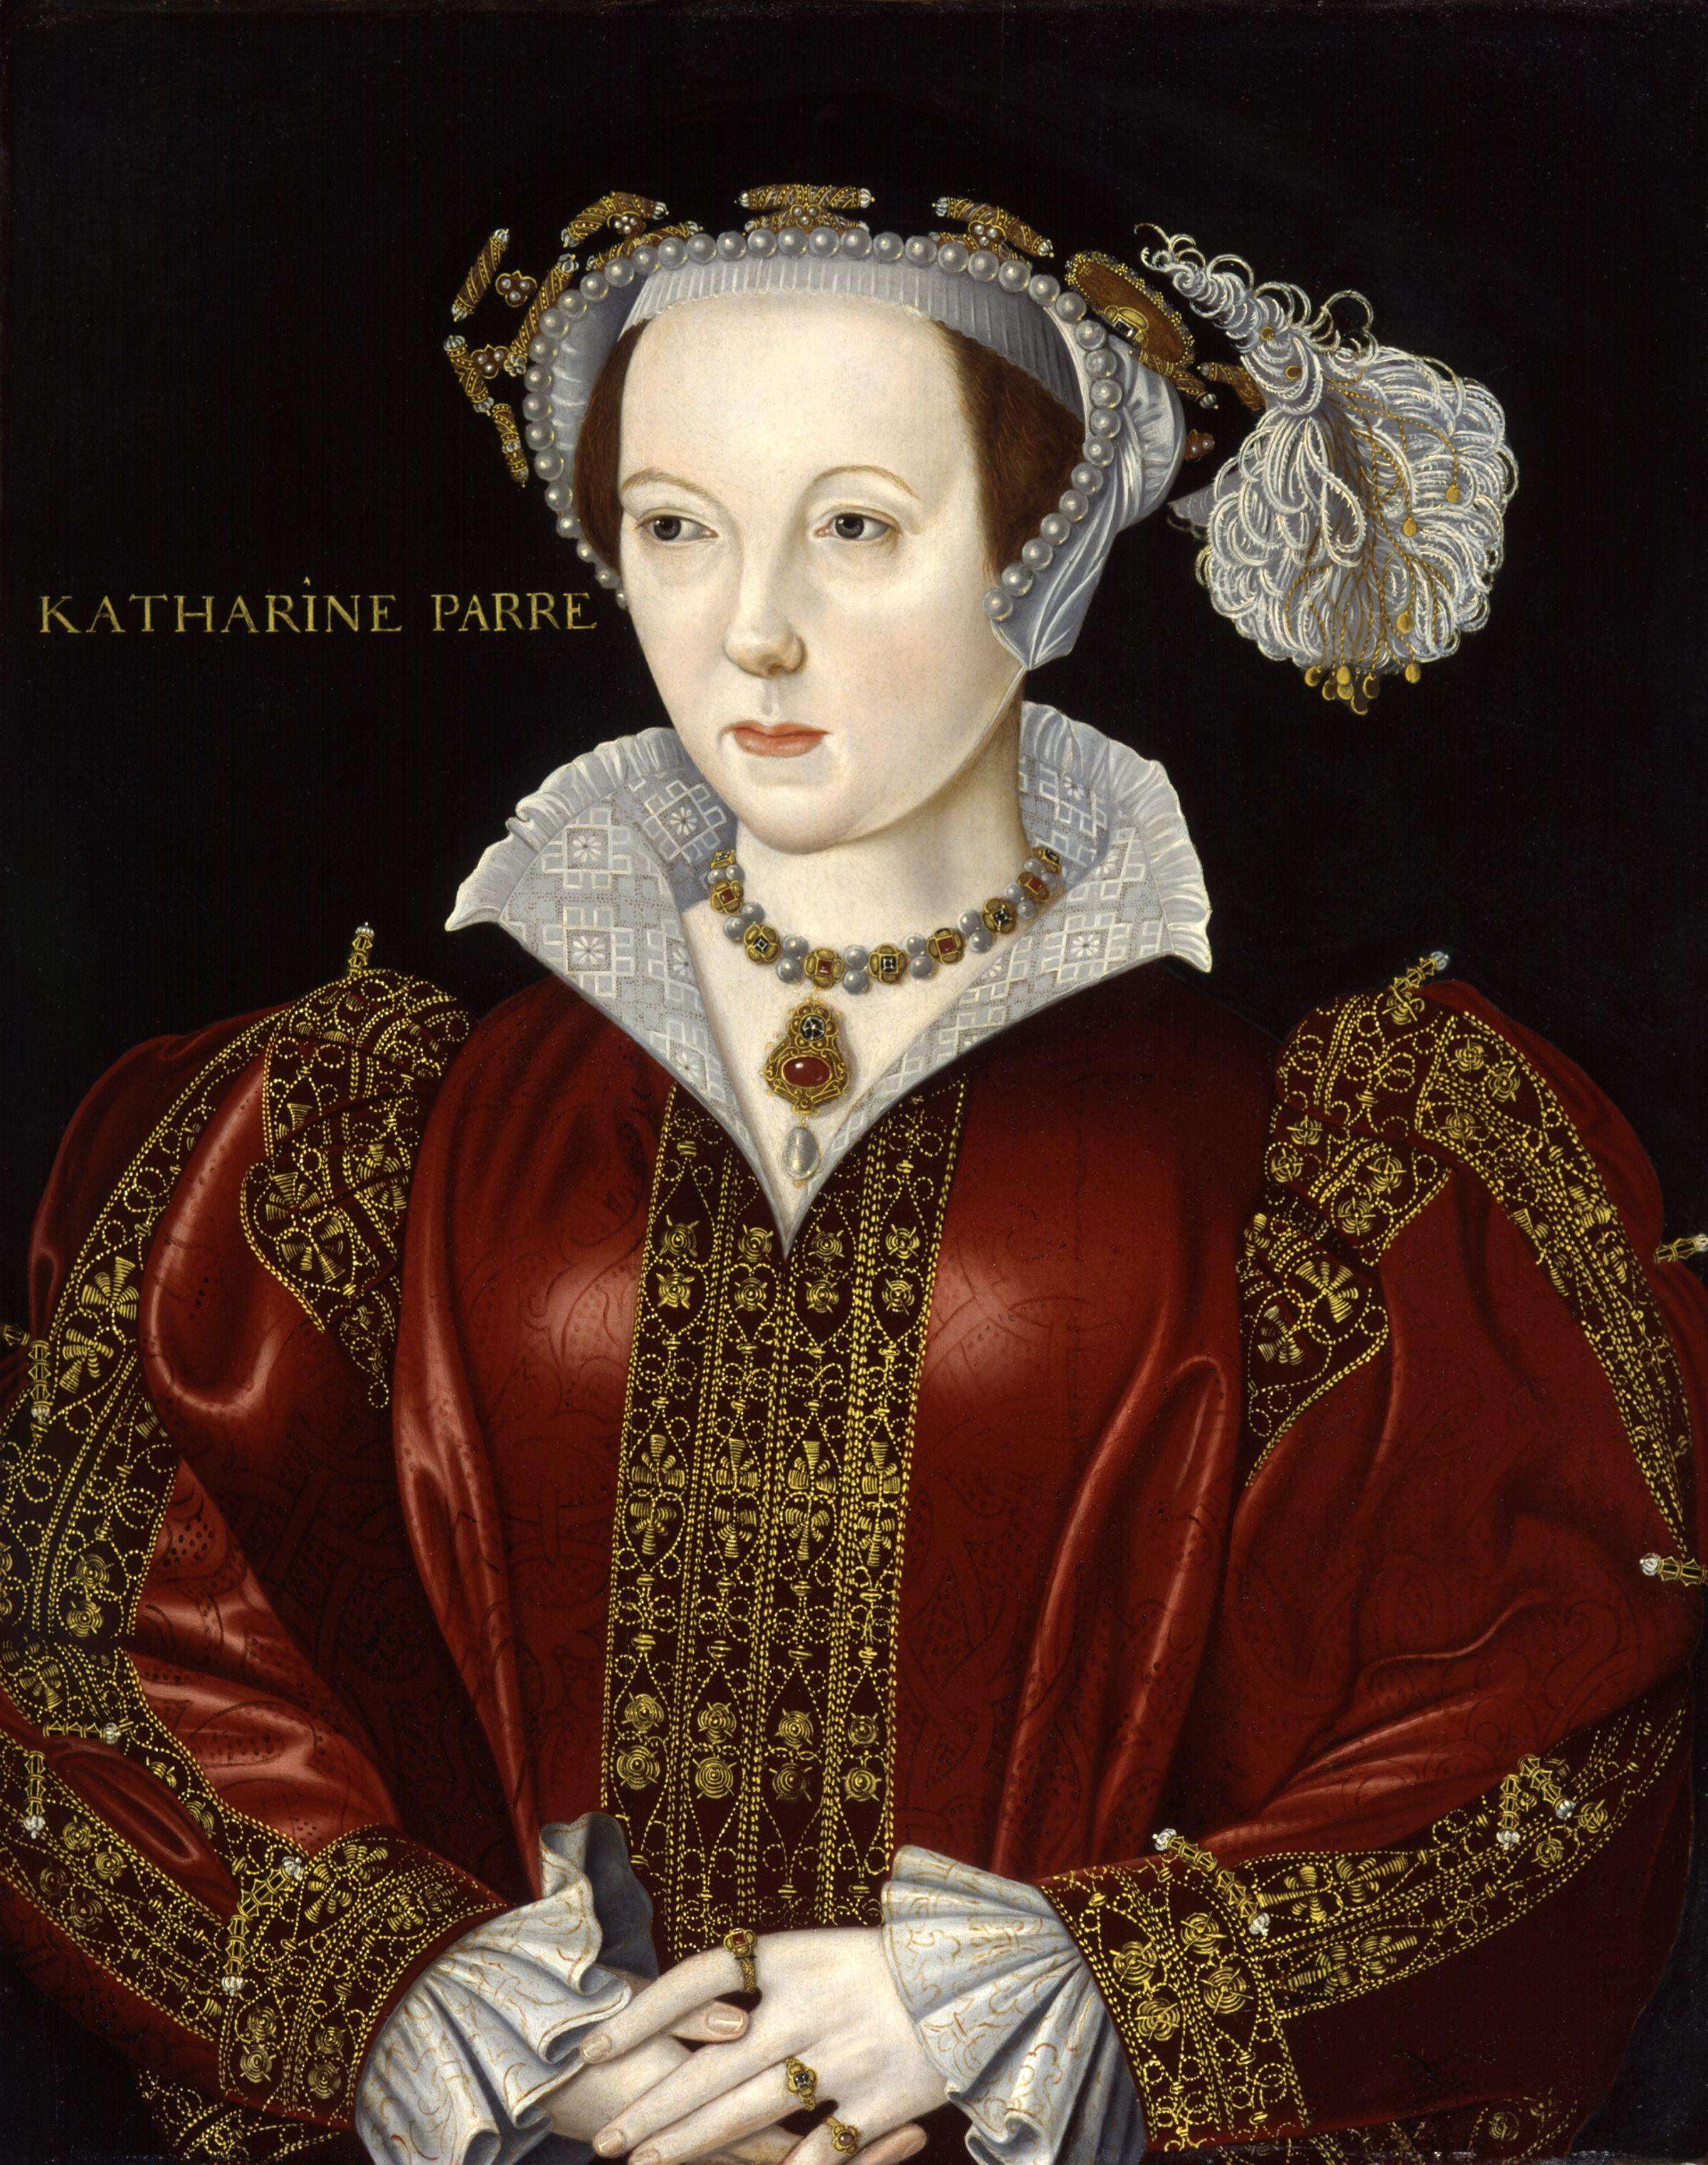 Another of Catherine's wards, Lady Jane Grey, also met a violent end. Her ghost allegedly haunts the Tower of London.